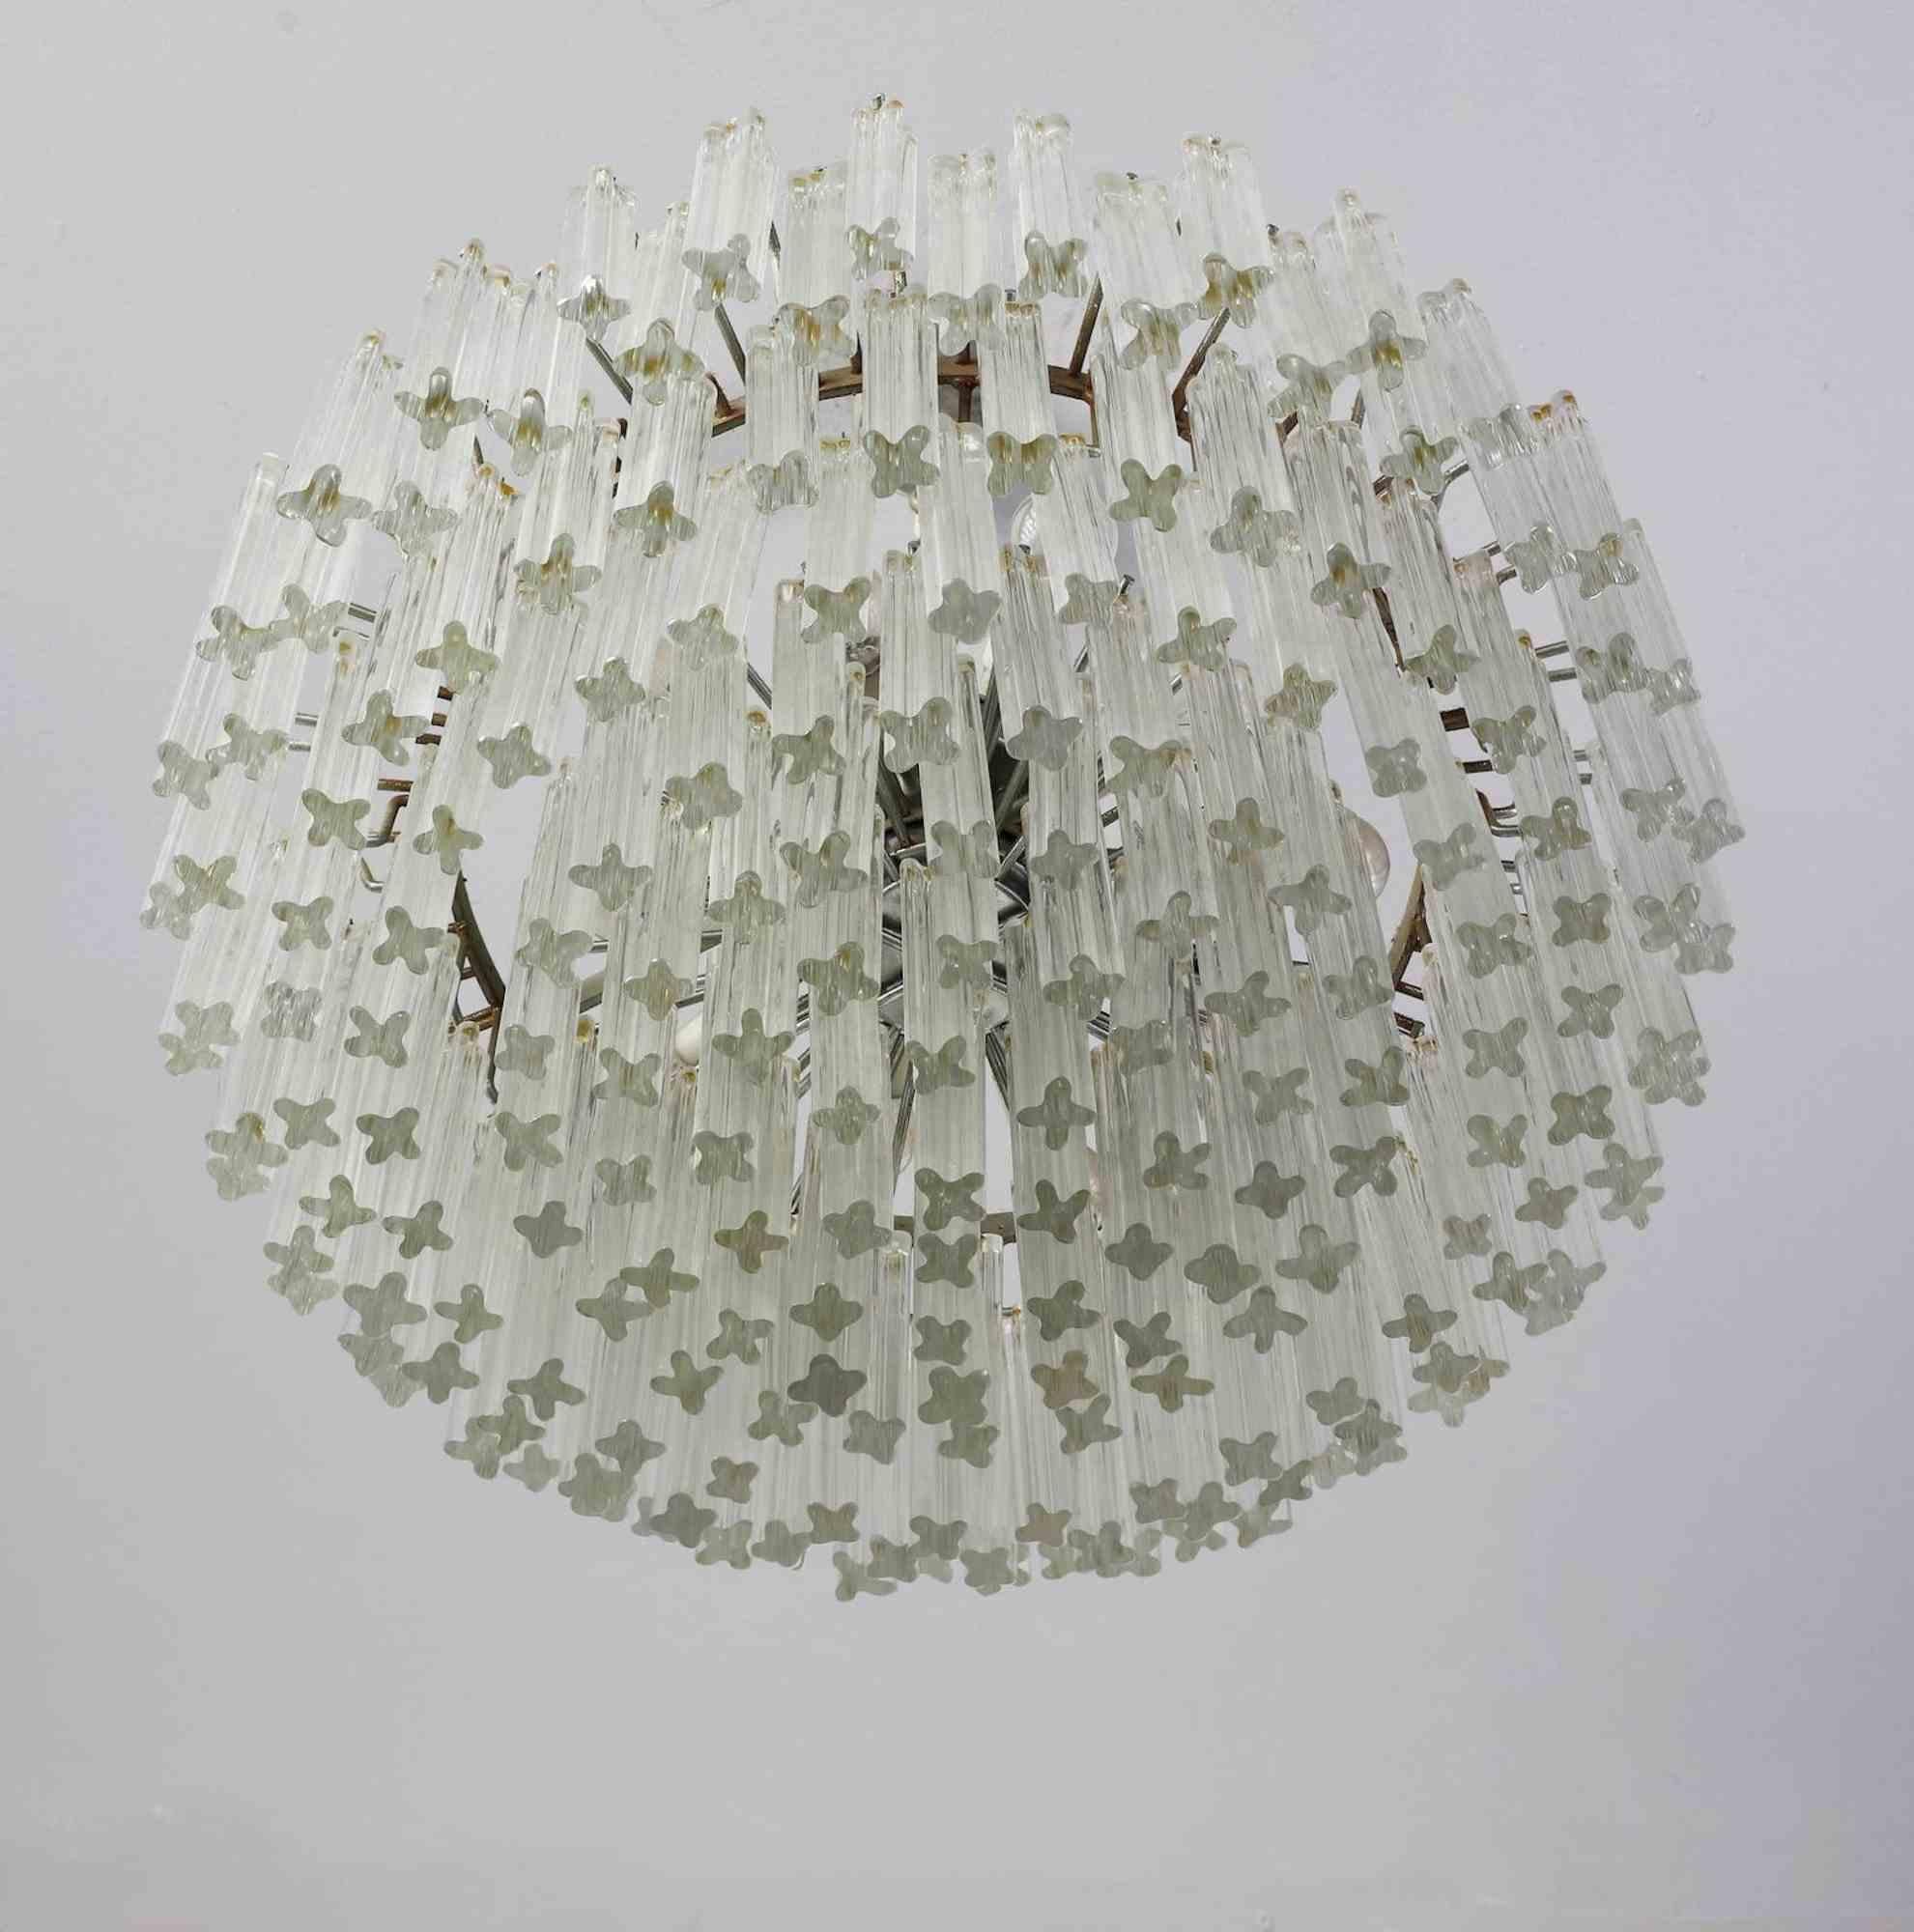 Trilobo ceiling lamp by Venini, Italy 1970s.
Metal and Murano Glass.

Cm 67,00 x 78,50. 

Very good condition.